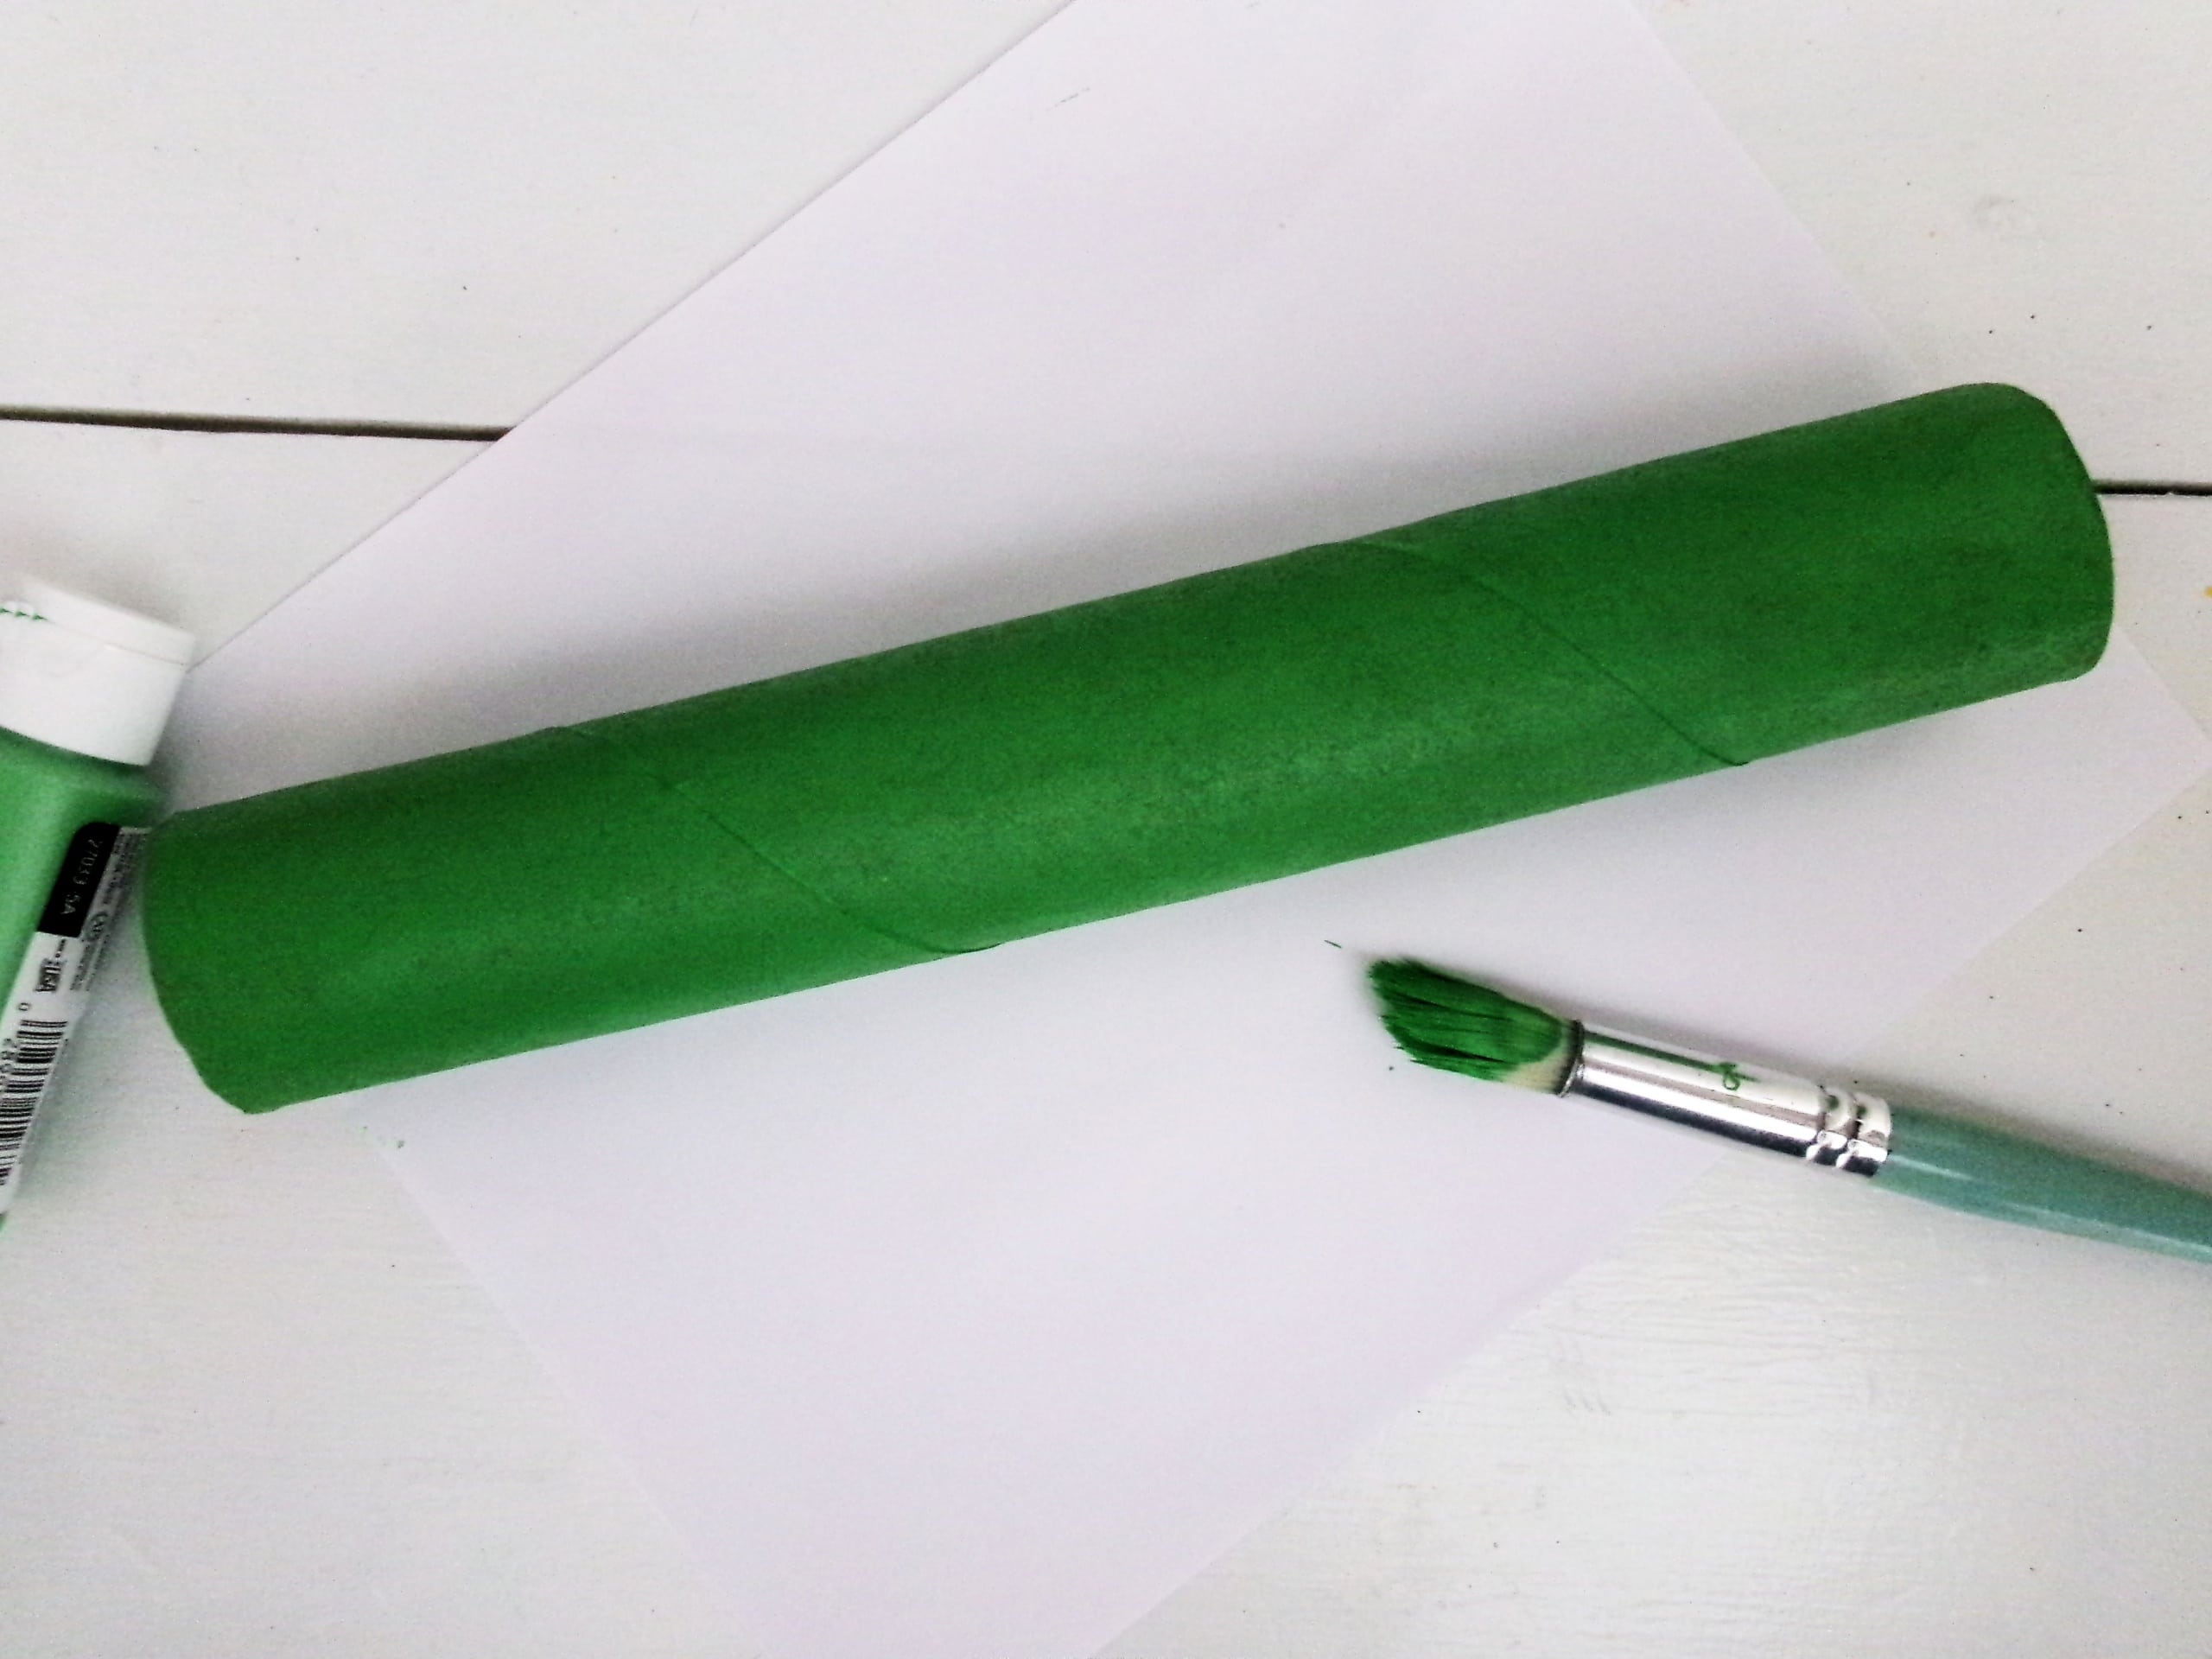 Start by painting a paper towel roll green.